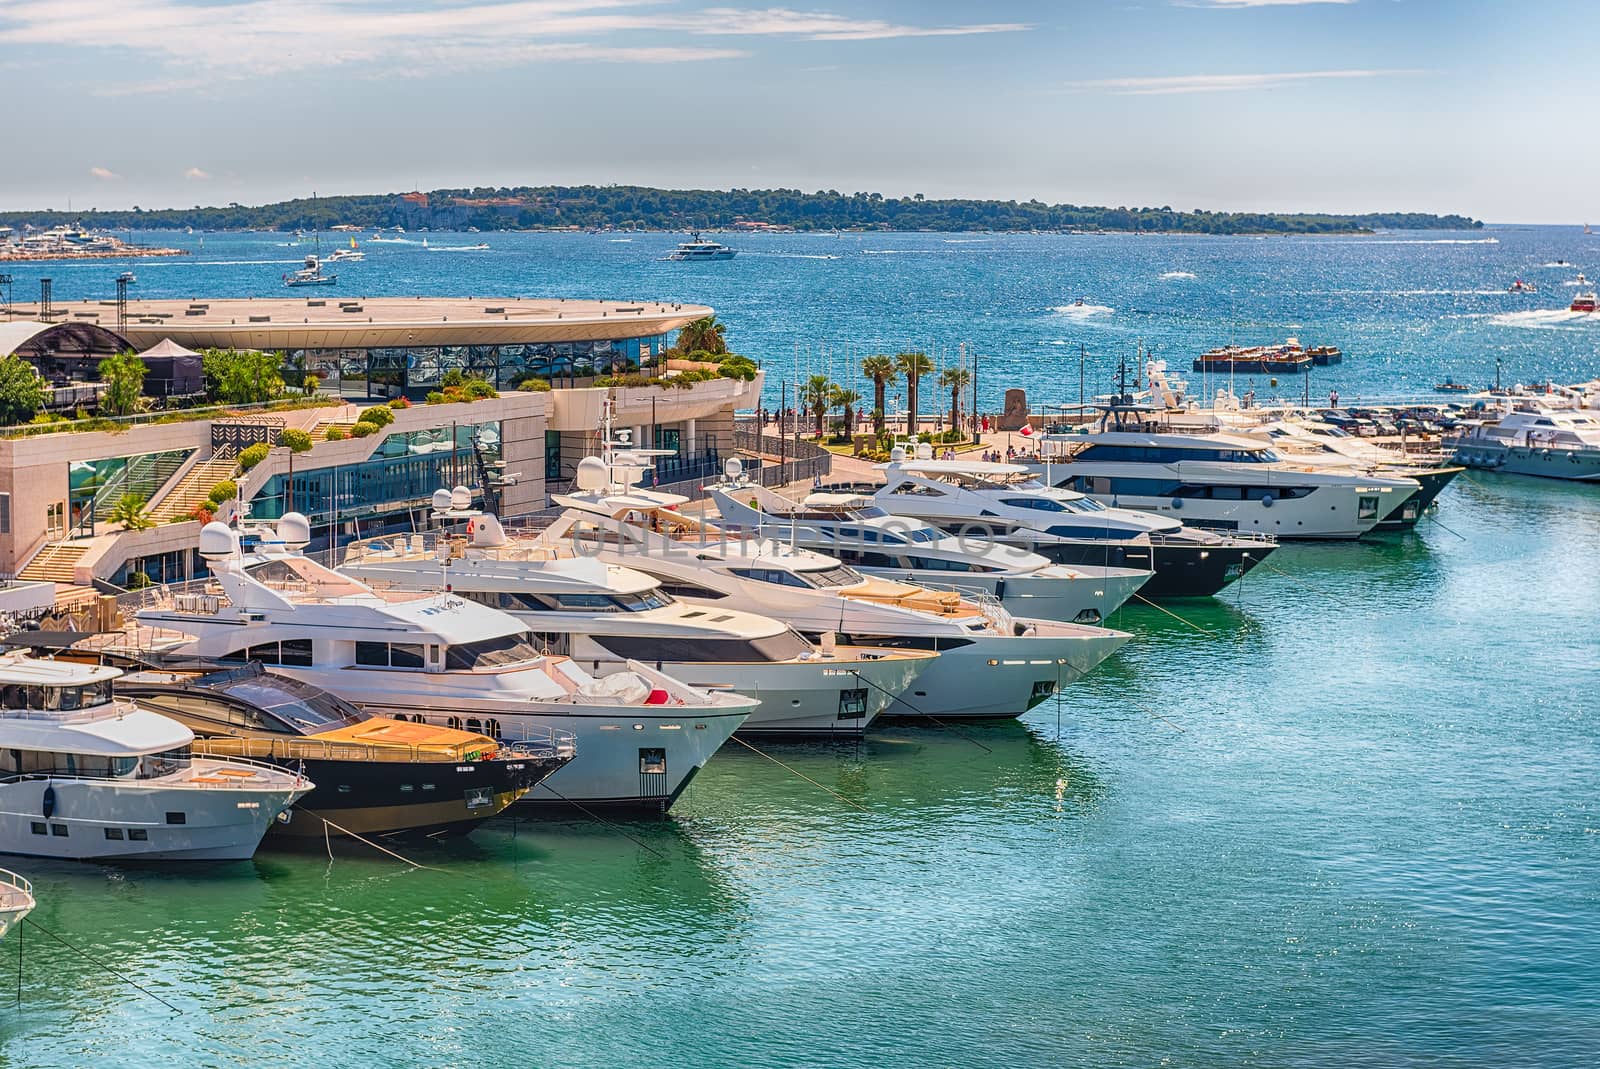 View over luxury yachts of Vieux Port in Le Suquet district, city centre and old harbour of Cannes, Cote d'Azur, France